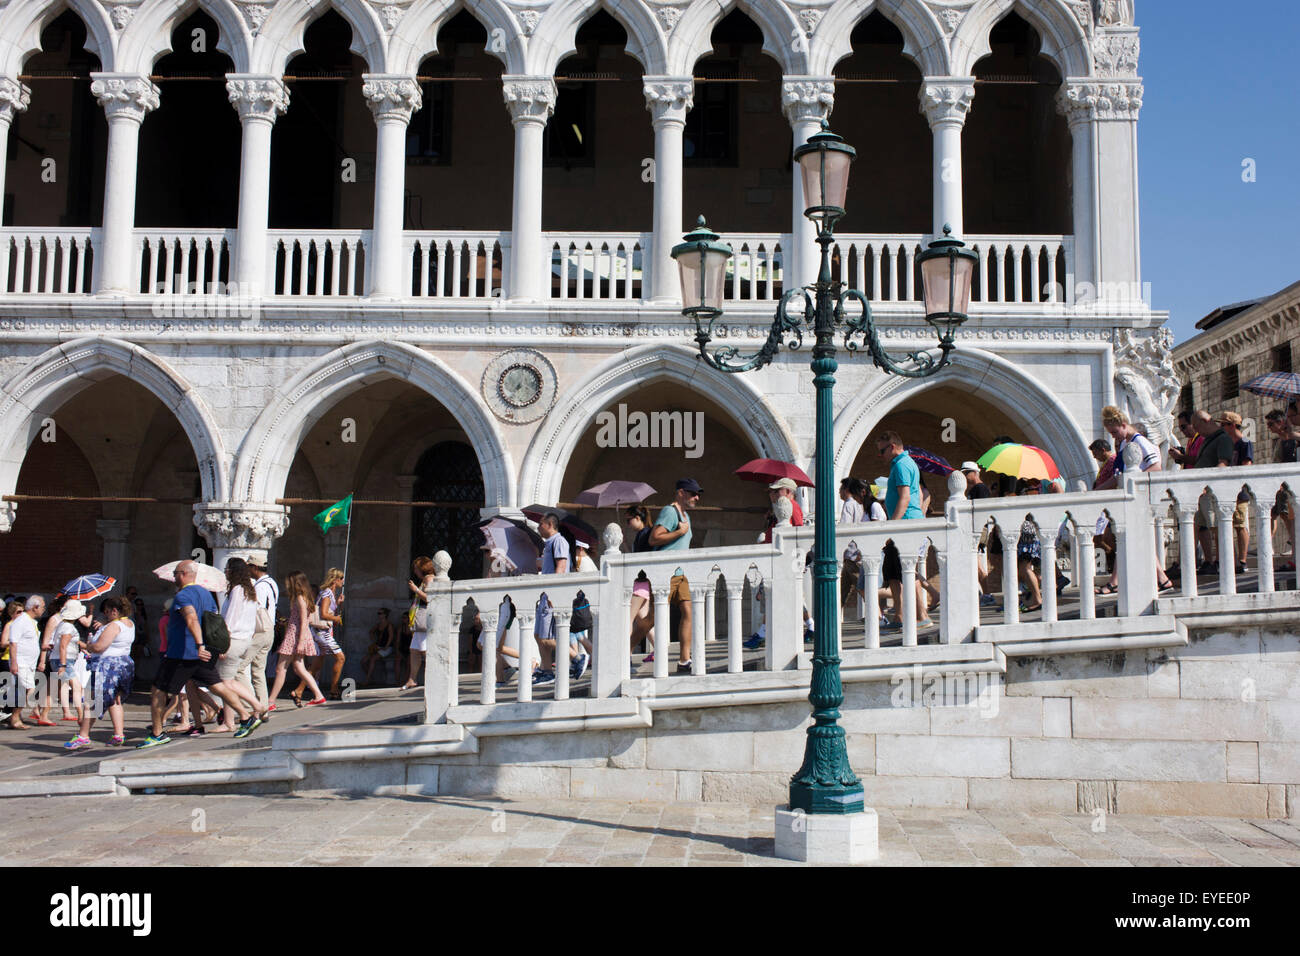 Tourist crowds outside the Doge's Palace in Piazza San Marco, Venice, Italy Stock Photo